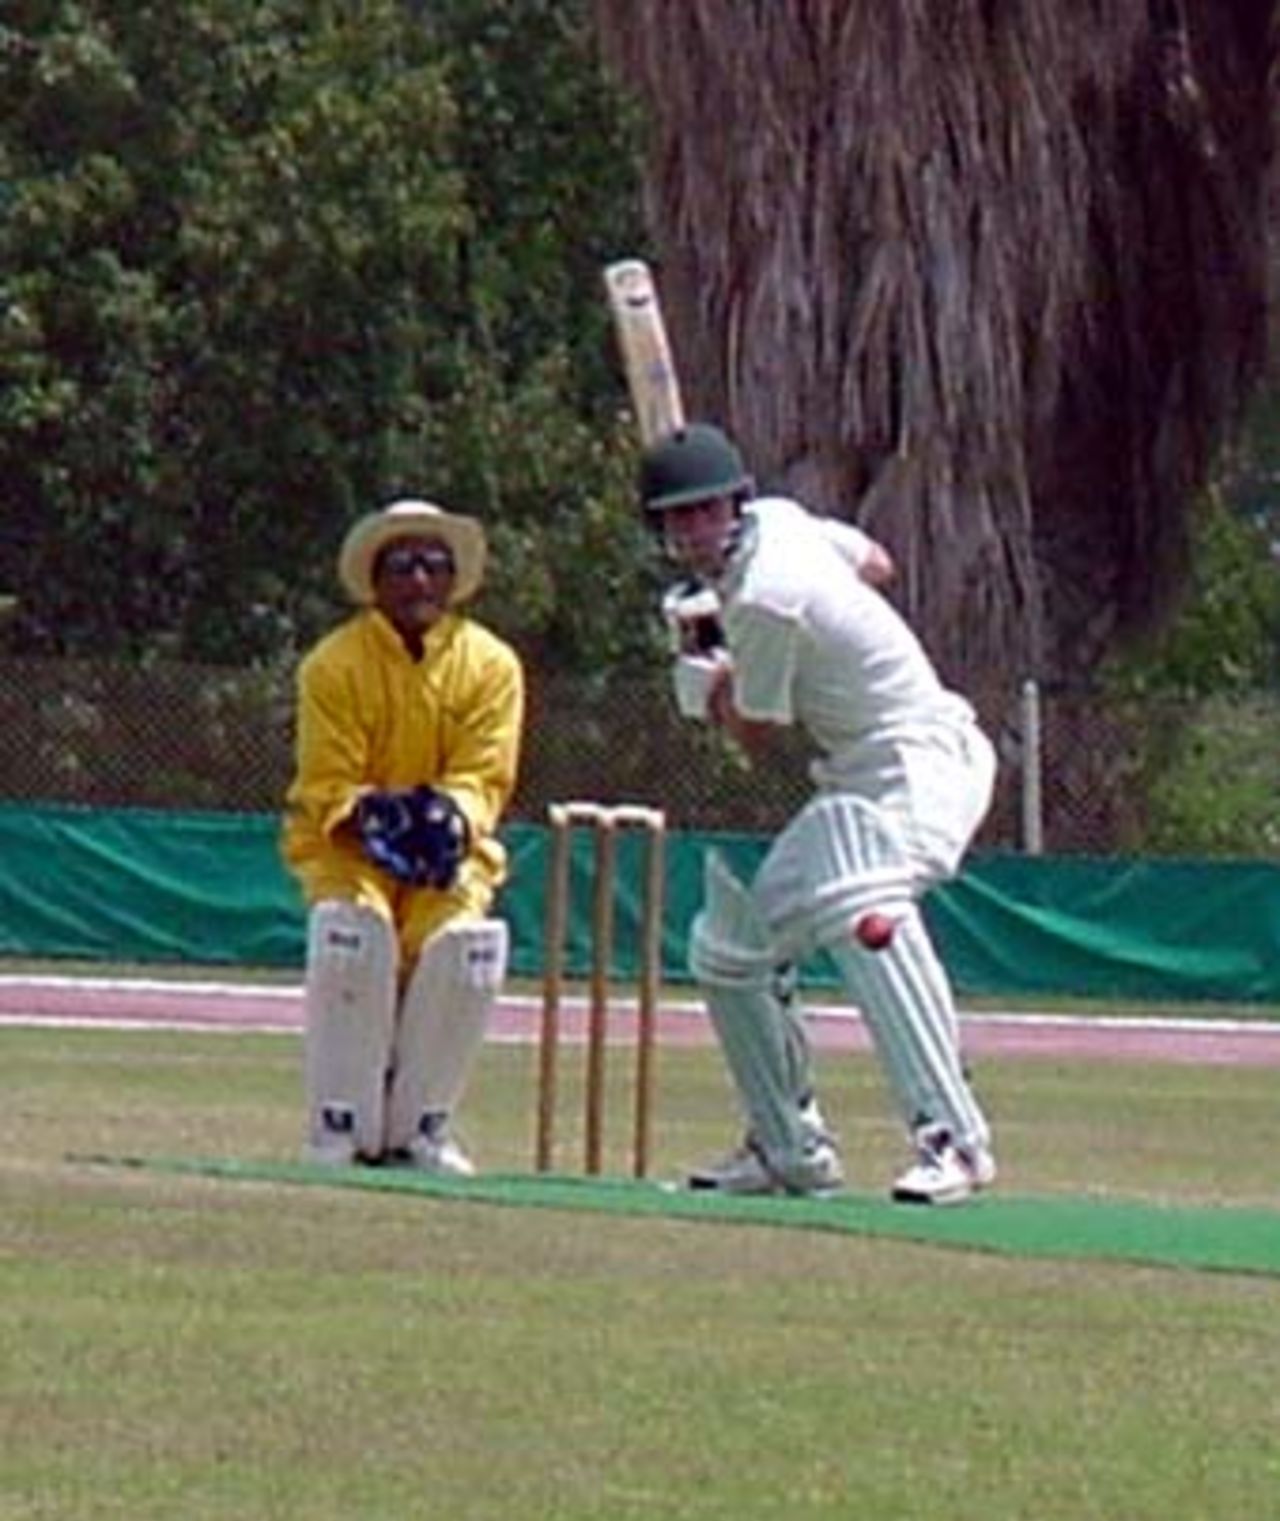 Danny Hotz looks to play through the off during his innings of 86 for Ra'anana versus Be'er Sheva on Friday